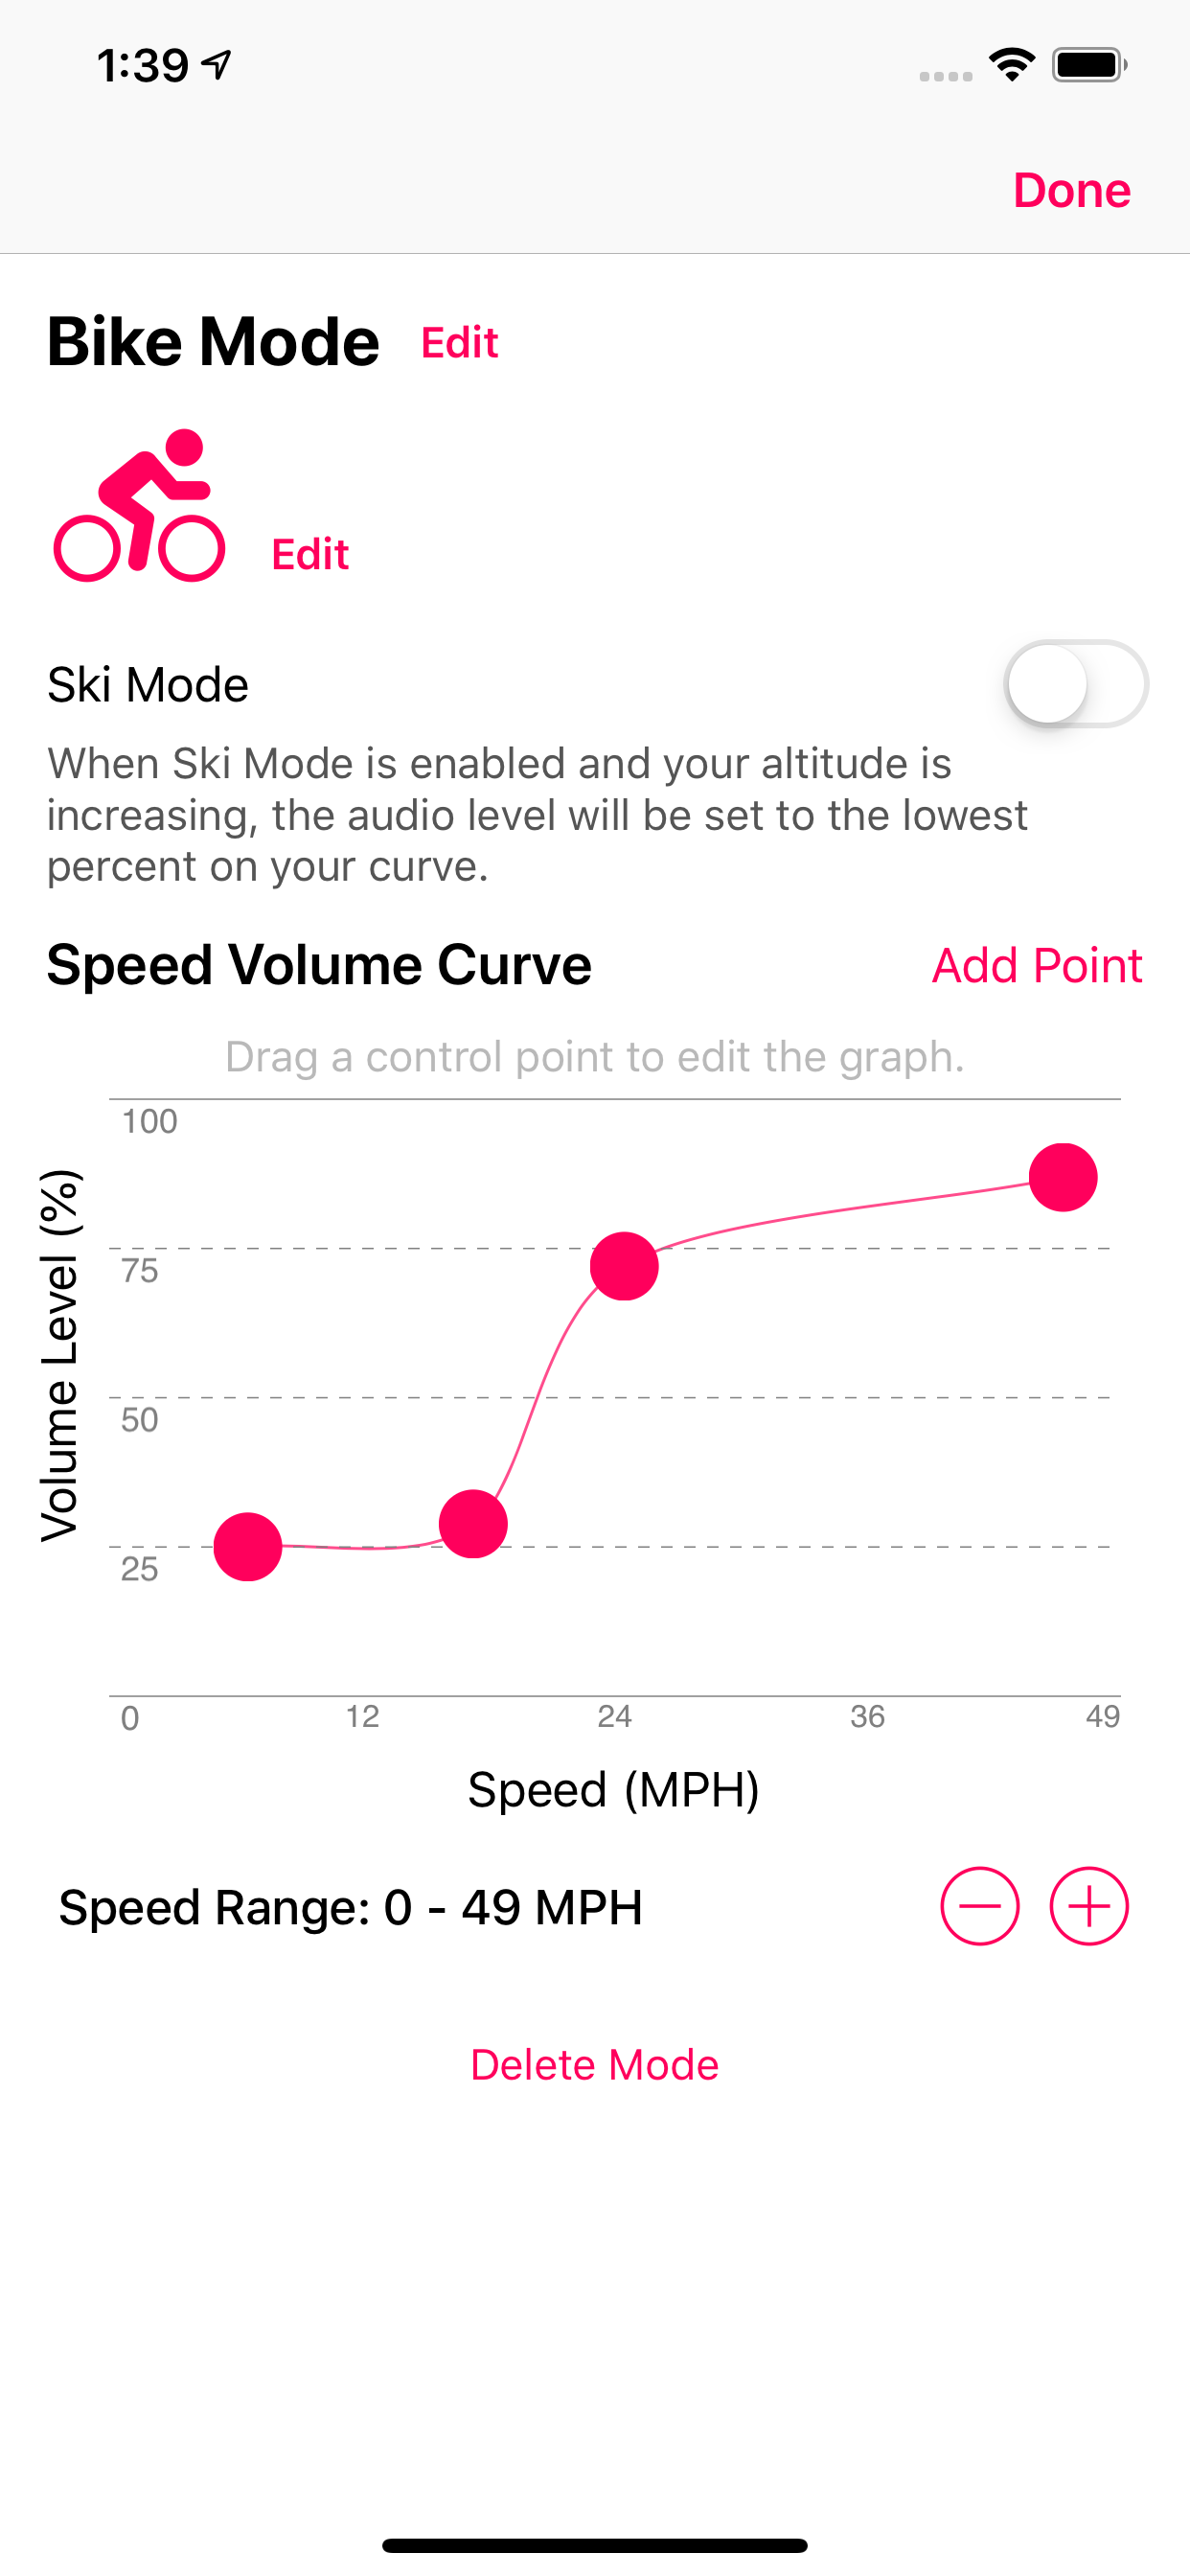 The Tempo iPhone app is open and showing the mode editor. This allows users to define custom adaptive audio profiles.